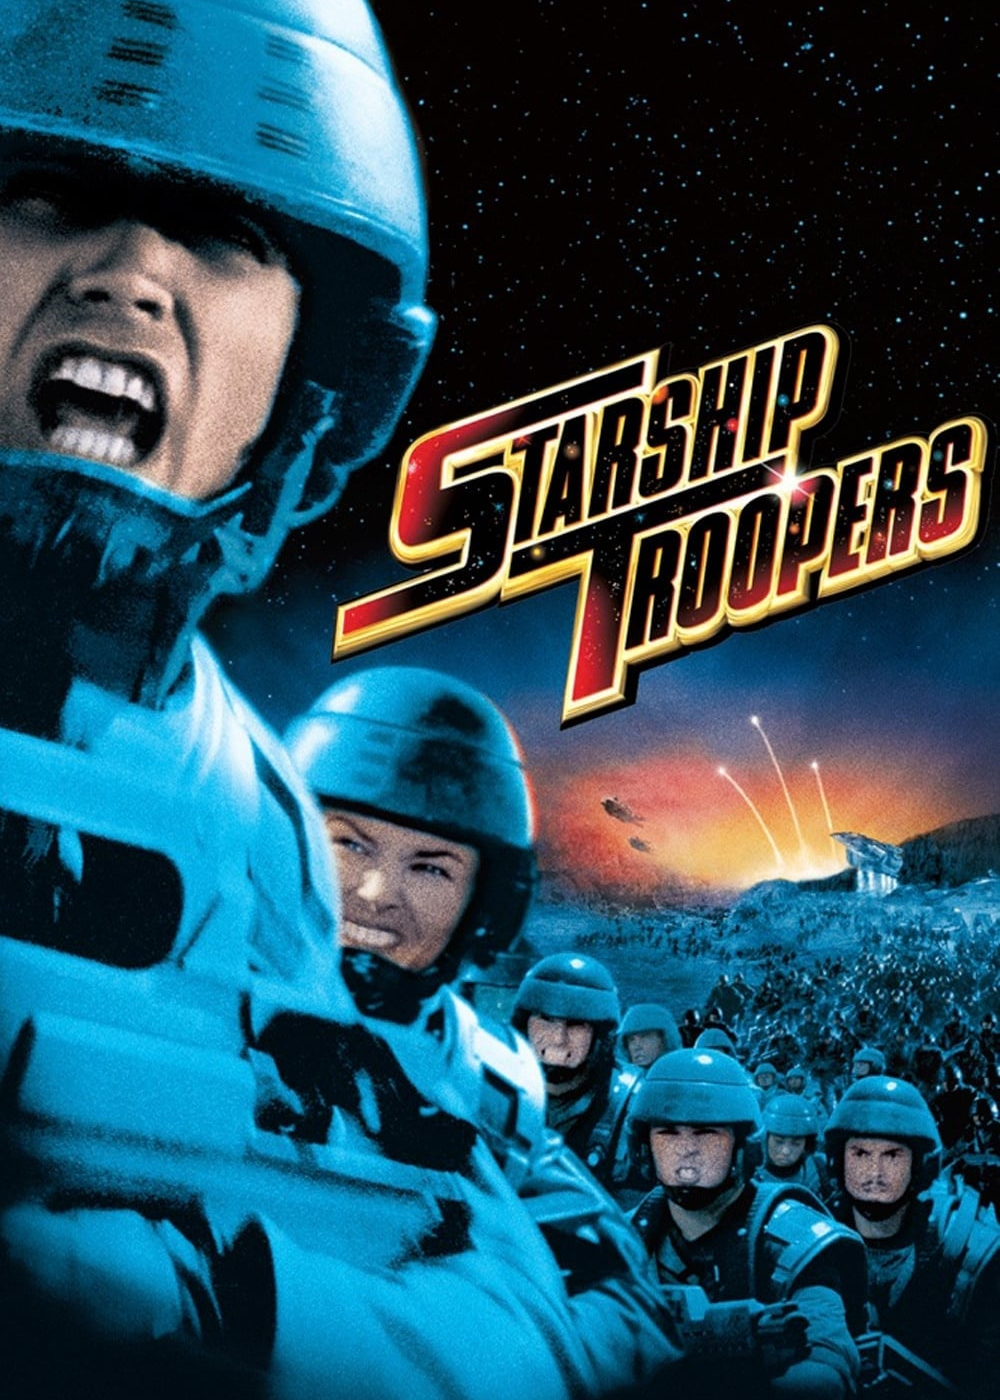 Poster Phim Starship Troopers (Starship Troopers)